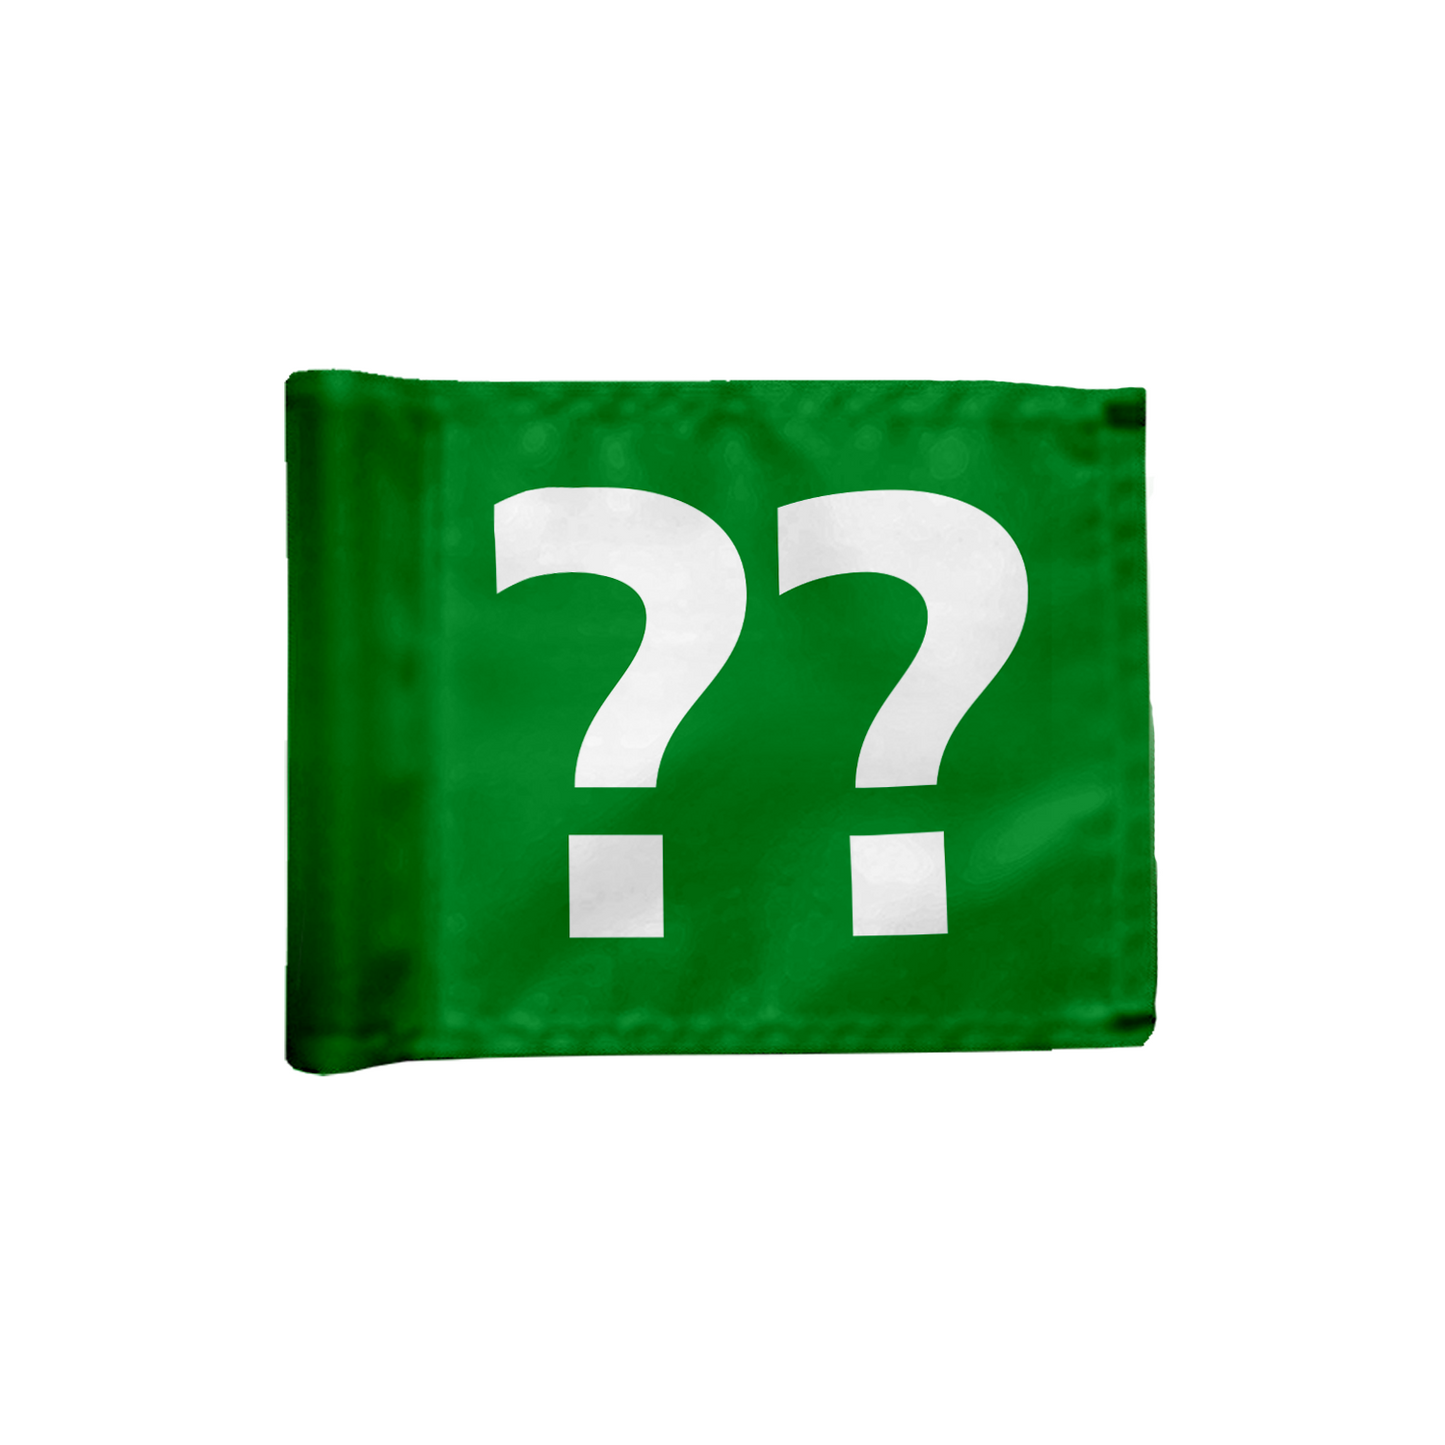 Single puttinggreen flag, one-sided,green with optional hole number, 200 gram fabric 